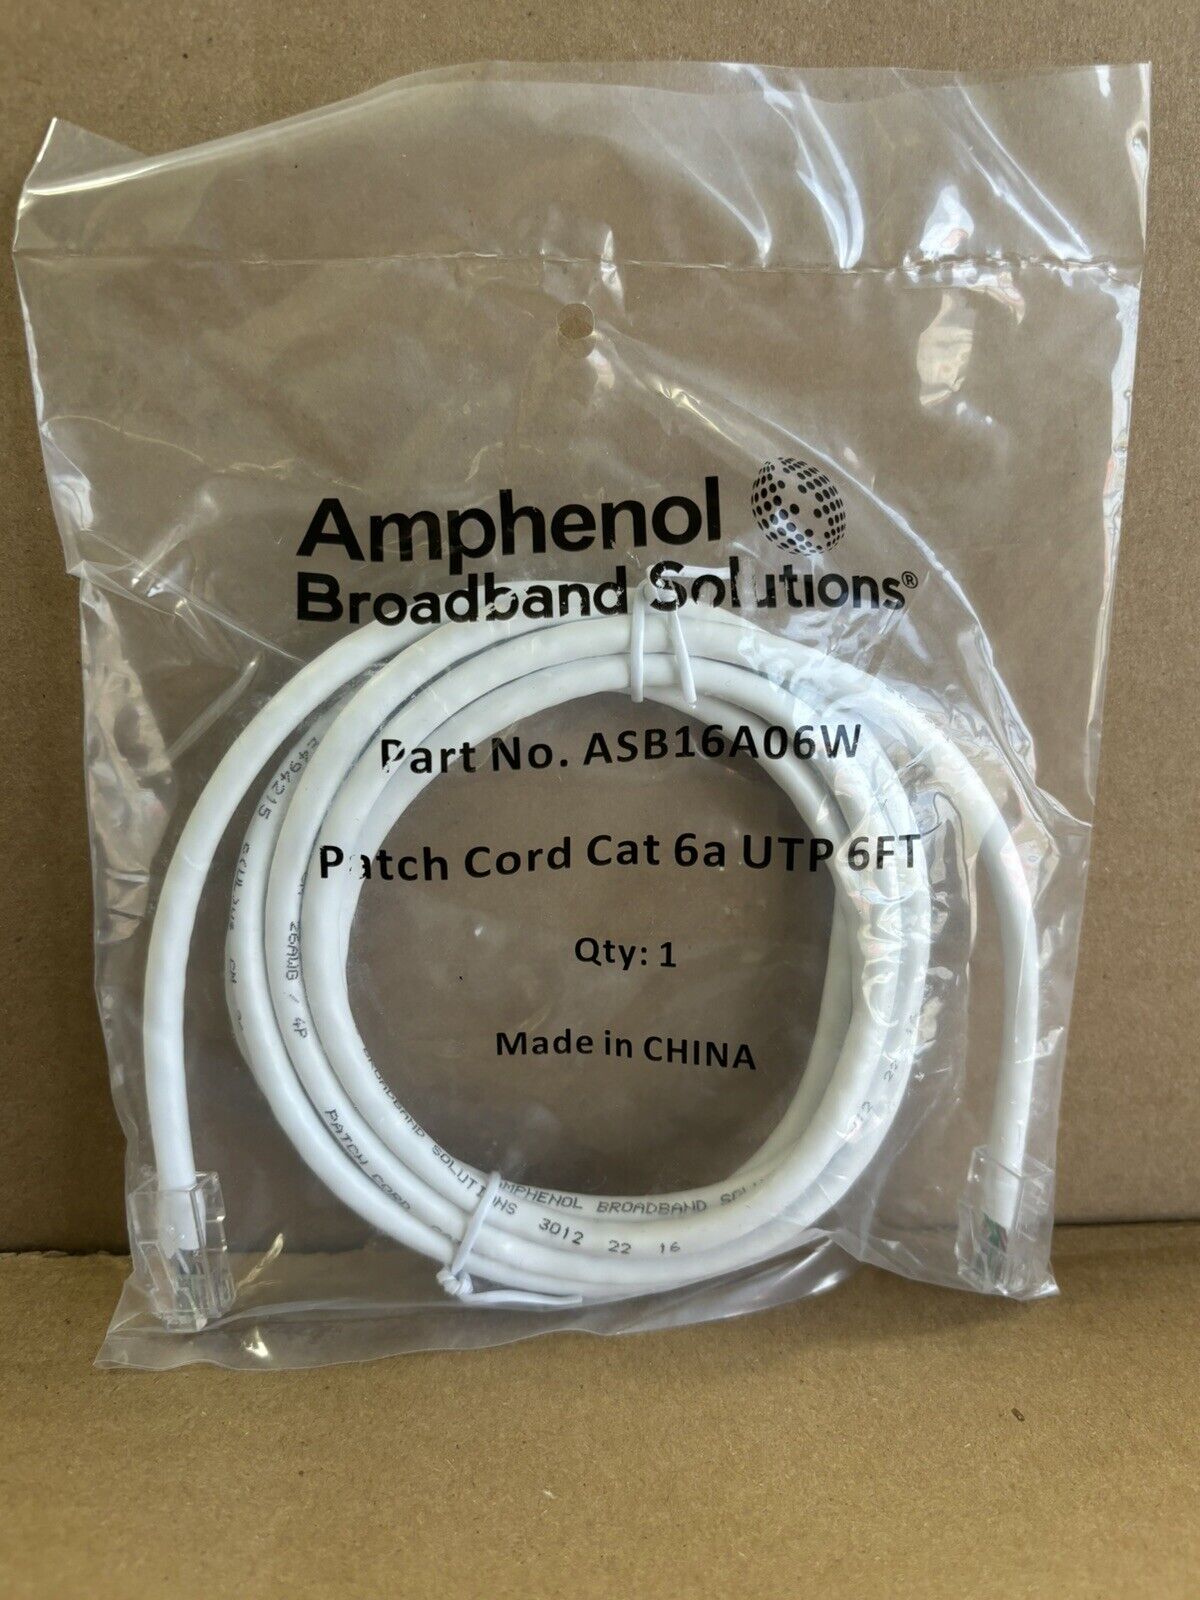 ASB16A06W 6ft (1.8m) Cat6 Unshielded Ethernet Network Cable -White (200 pieces)